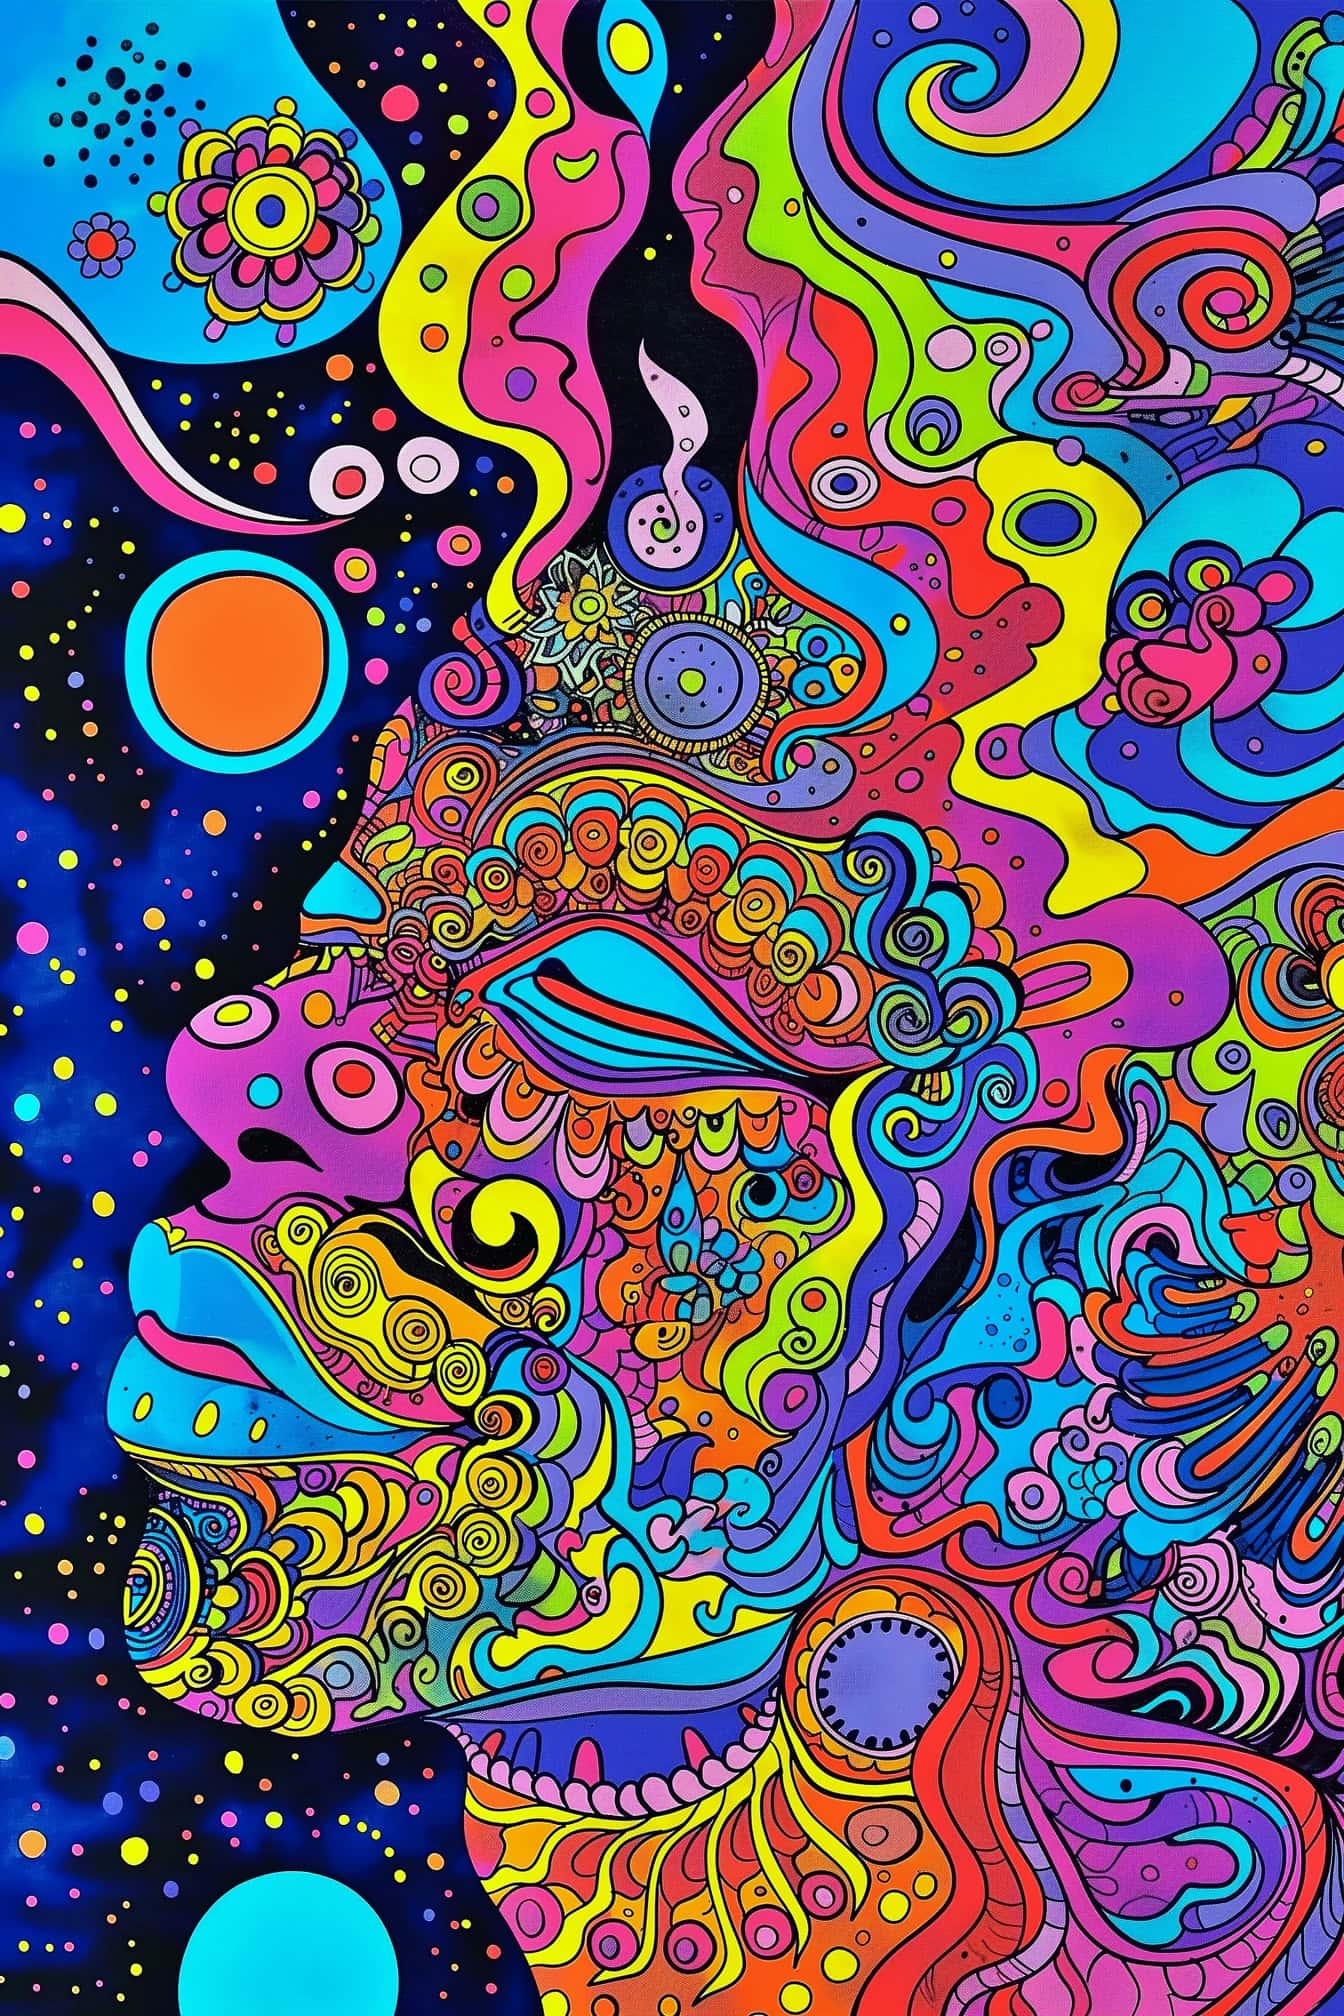 An artwork poster of a face of a woman in a mix of psychedelic and pop art style